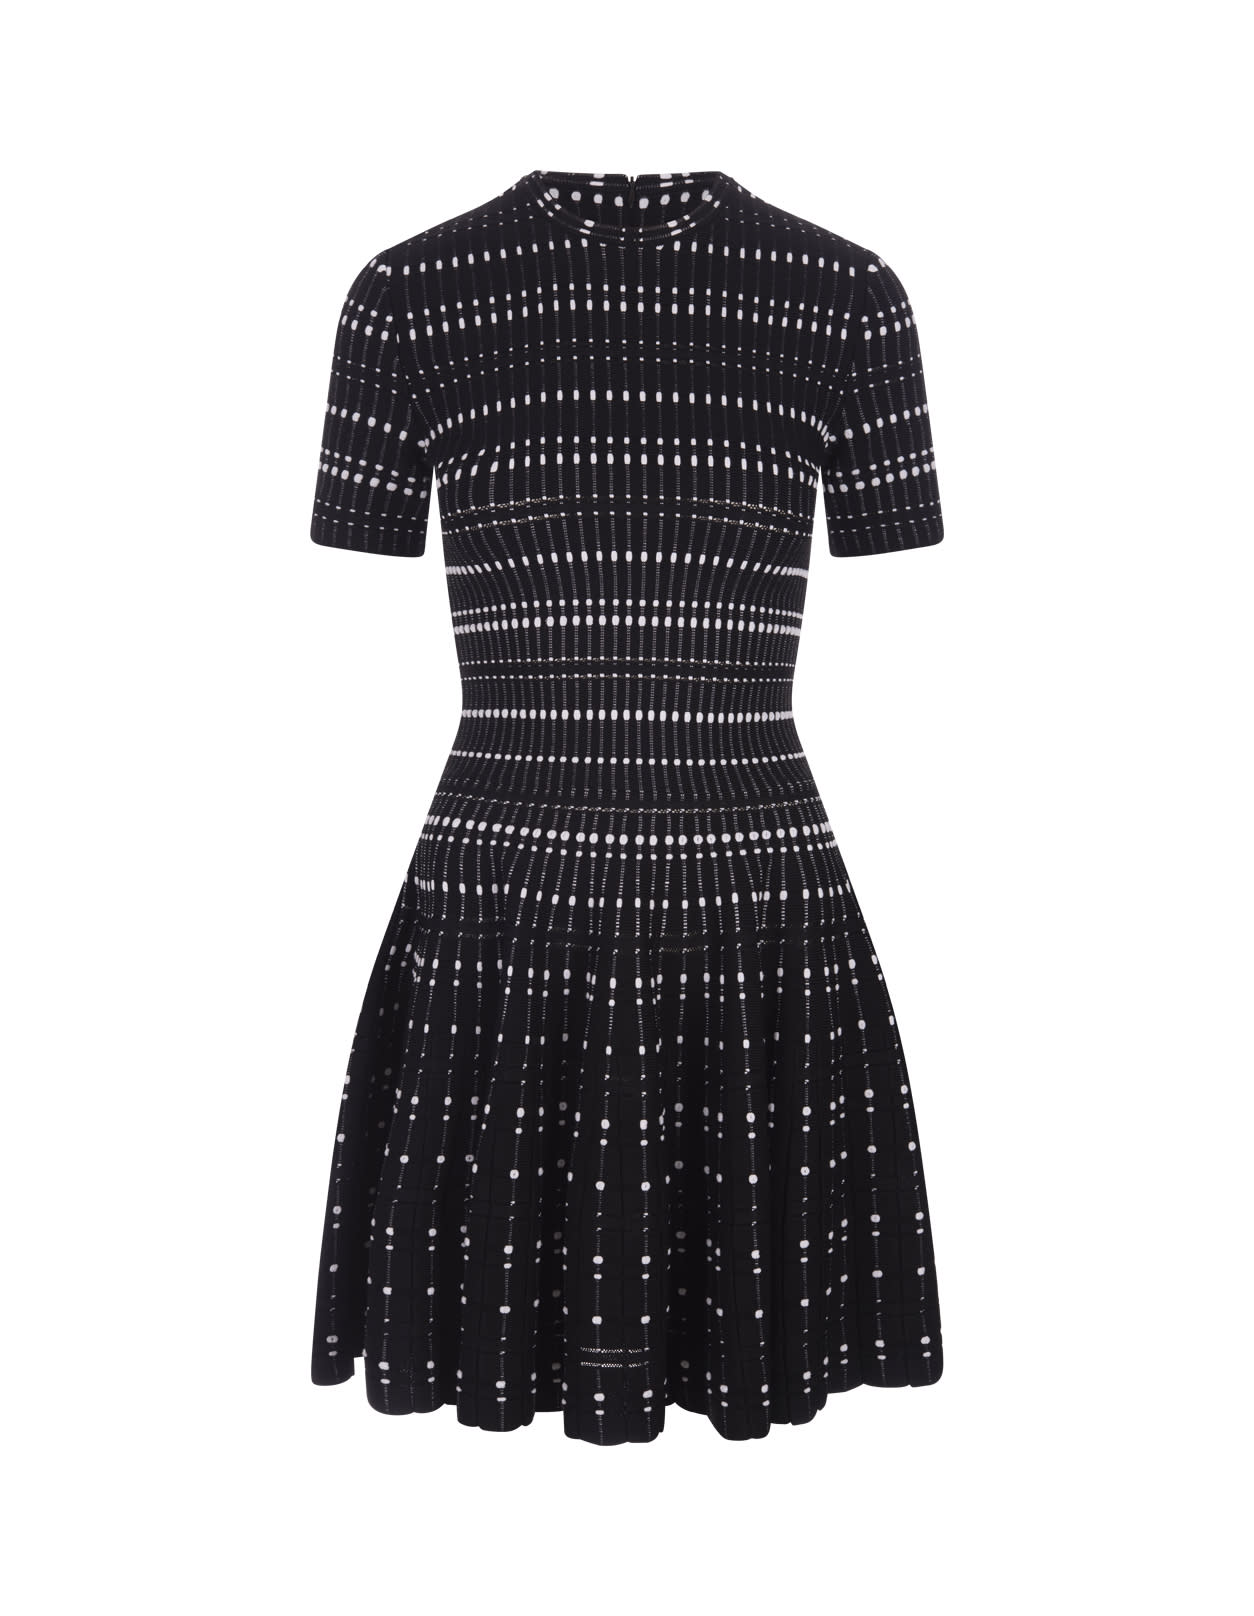 ALEXANDER MCQUEEN BLACK AND WHITE KNITTED MINI DRESS